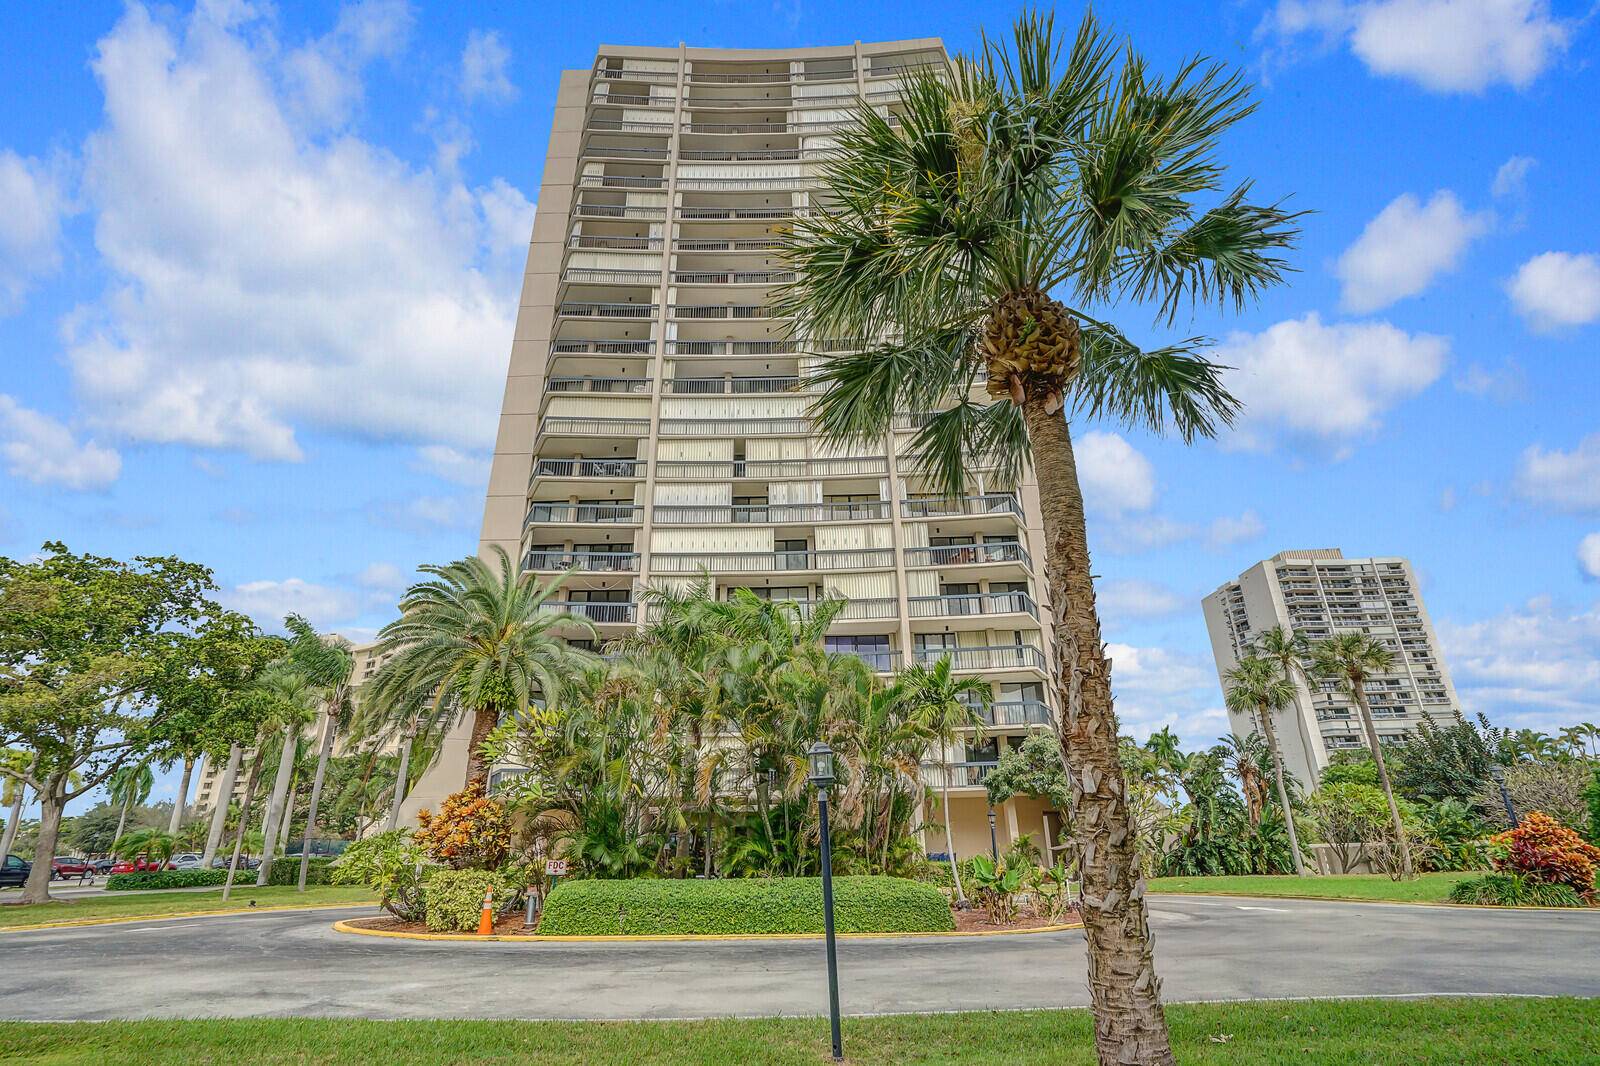 Jefferson Tower unit 203 is a spacious 2 bed 2 bath residence located on the second floor.